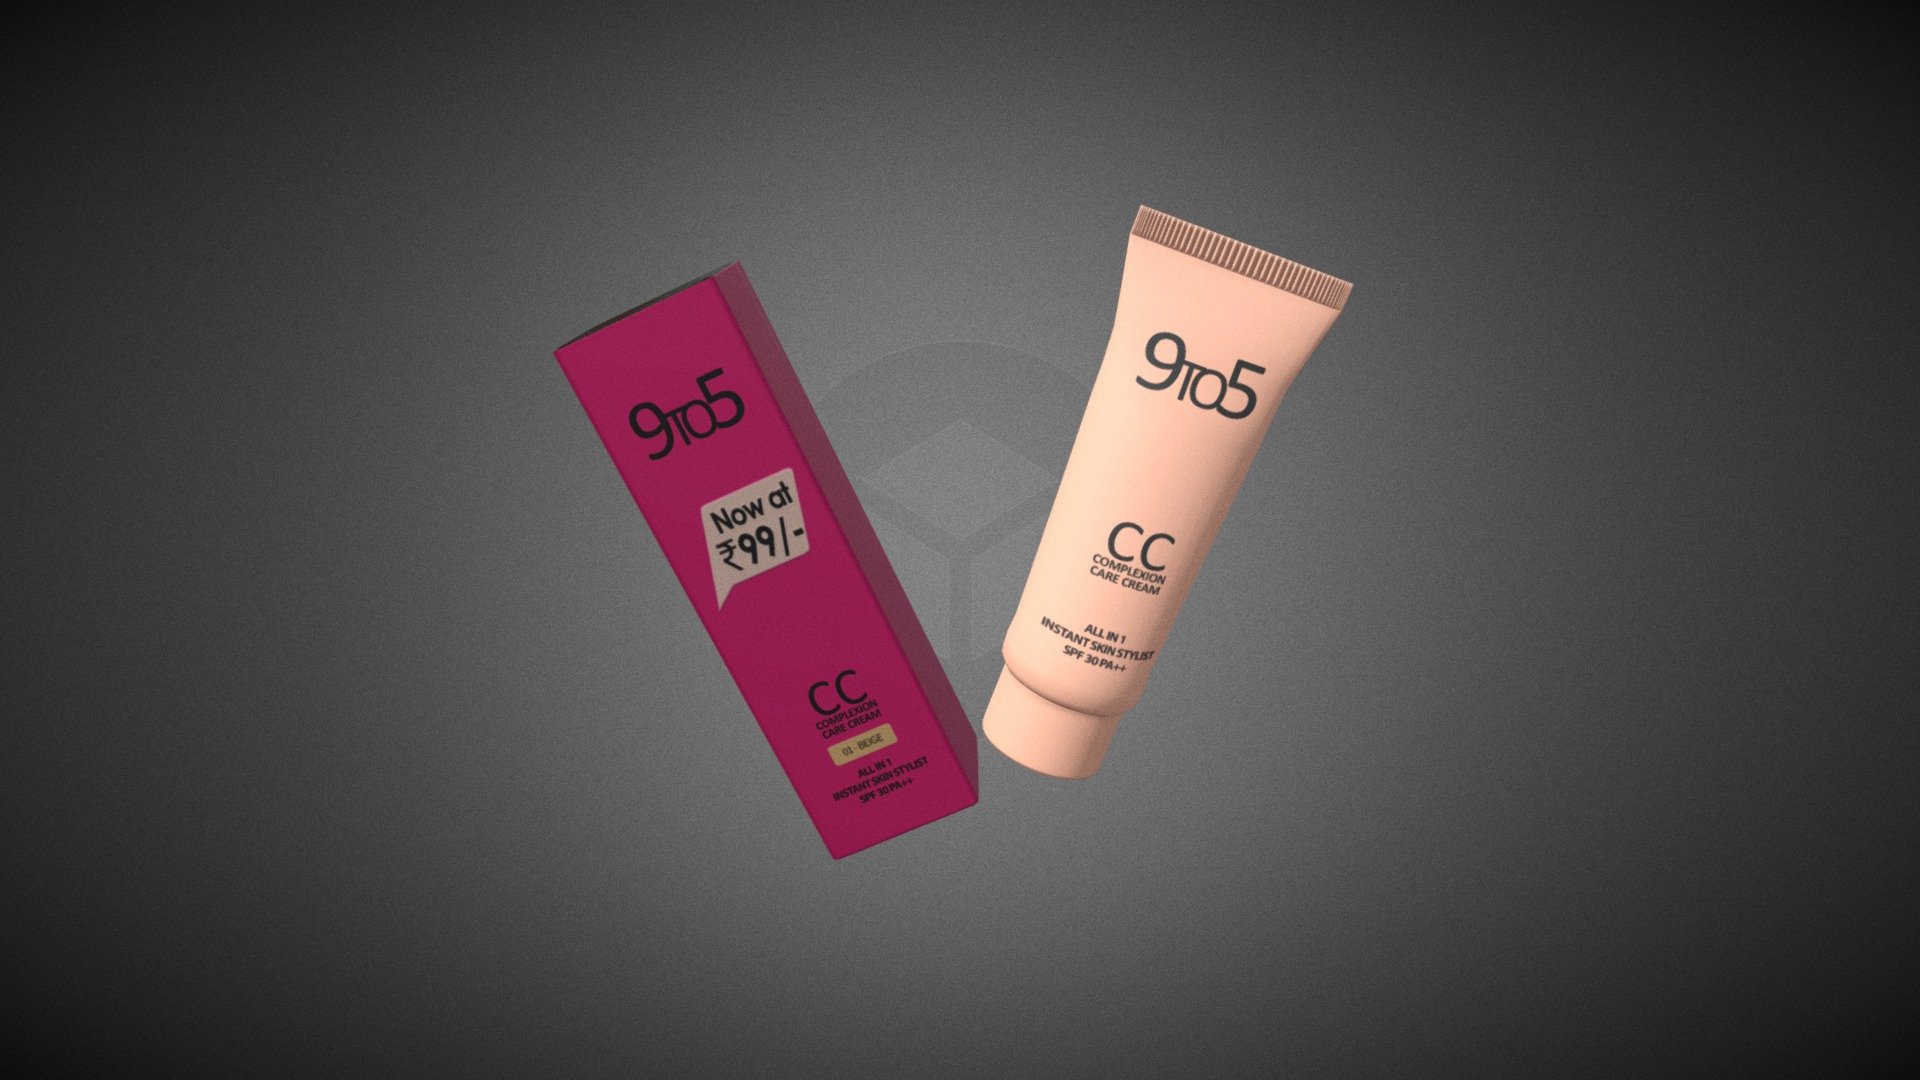 Realistic tube model with packing box.
Around 26,000 Faces
Show some support - Cosmetics Beige Cream Tube - Download Free 3D model by Deepinder (@deepinder26) 3d model